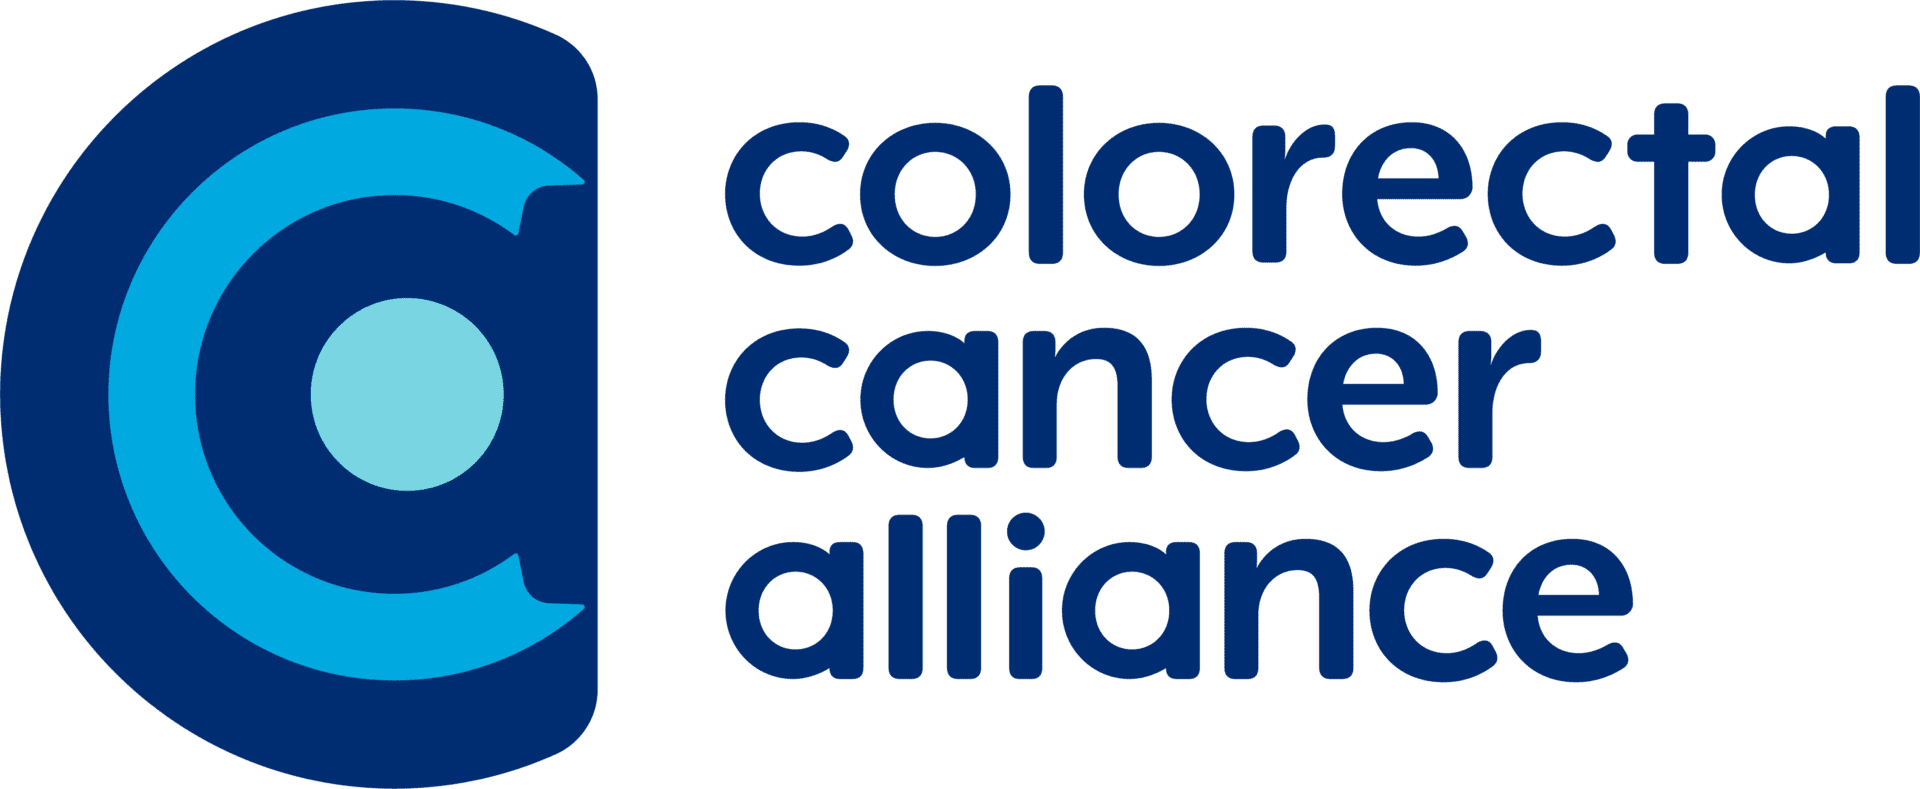 A logo for colorectal cancer alliance.